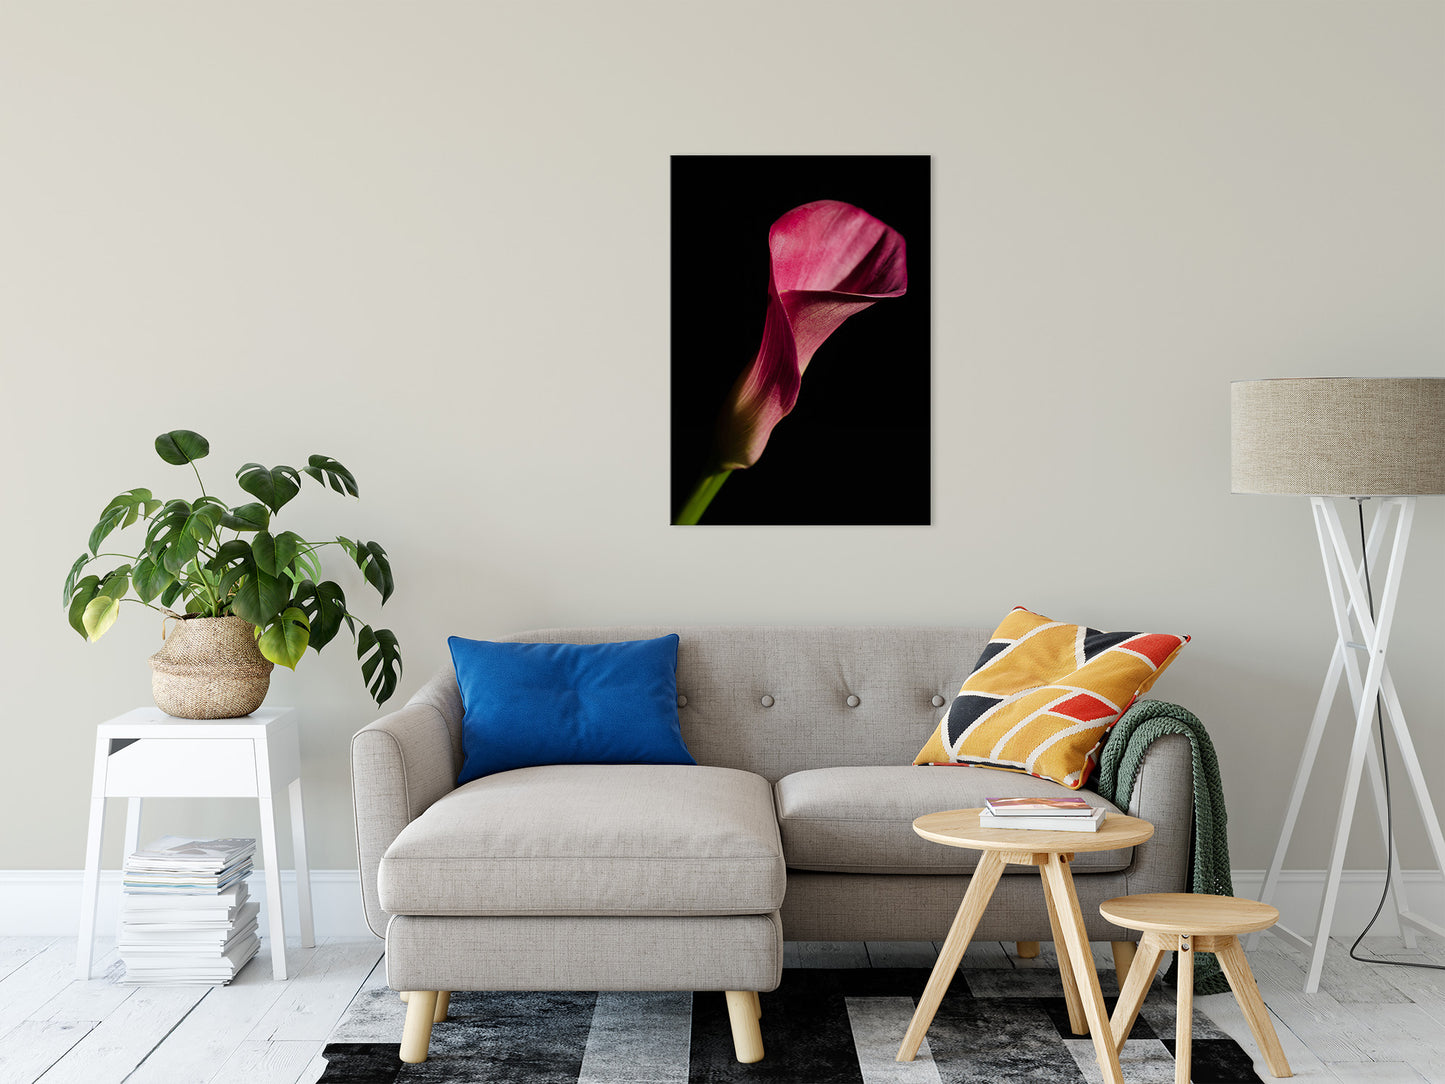 Pink Calla Lily Flower on Black Nature / Floral Photo Fine Art Canvas Wall Art Prints 24" x 36" - PIPAFINEART